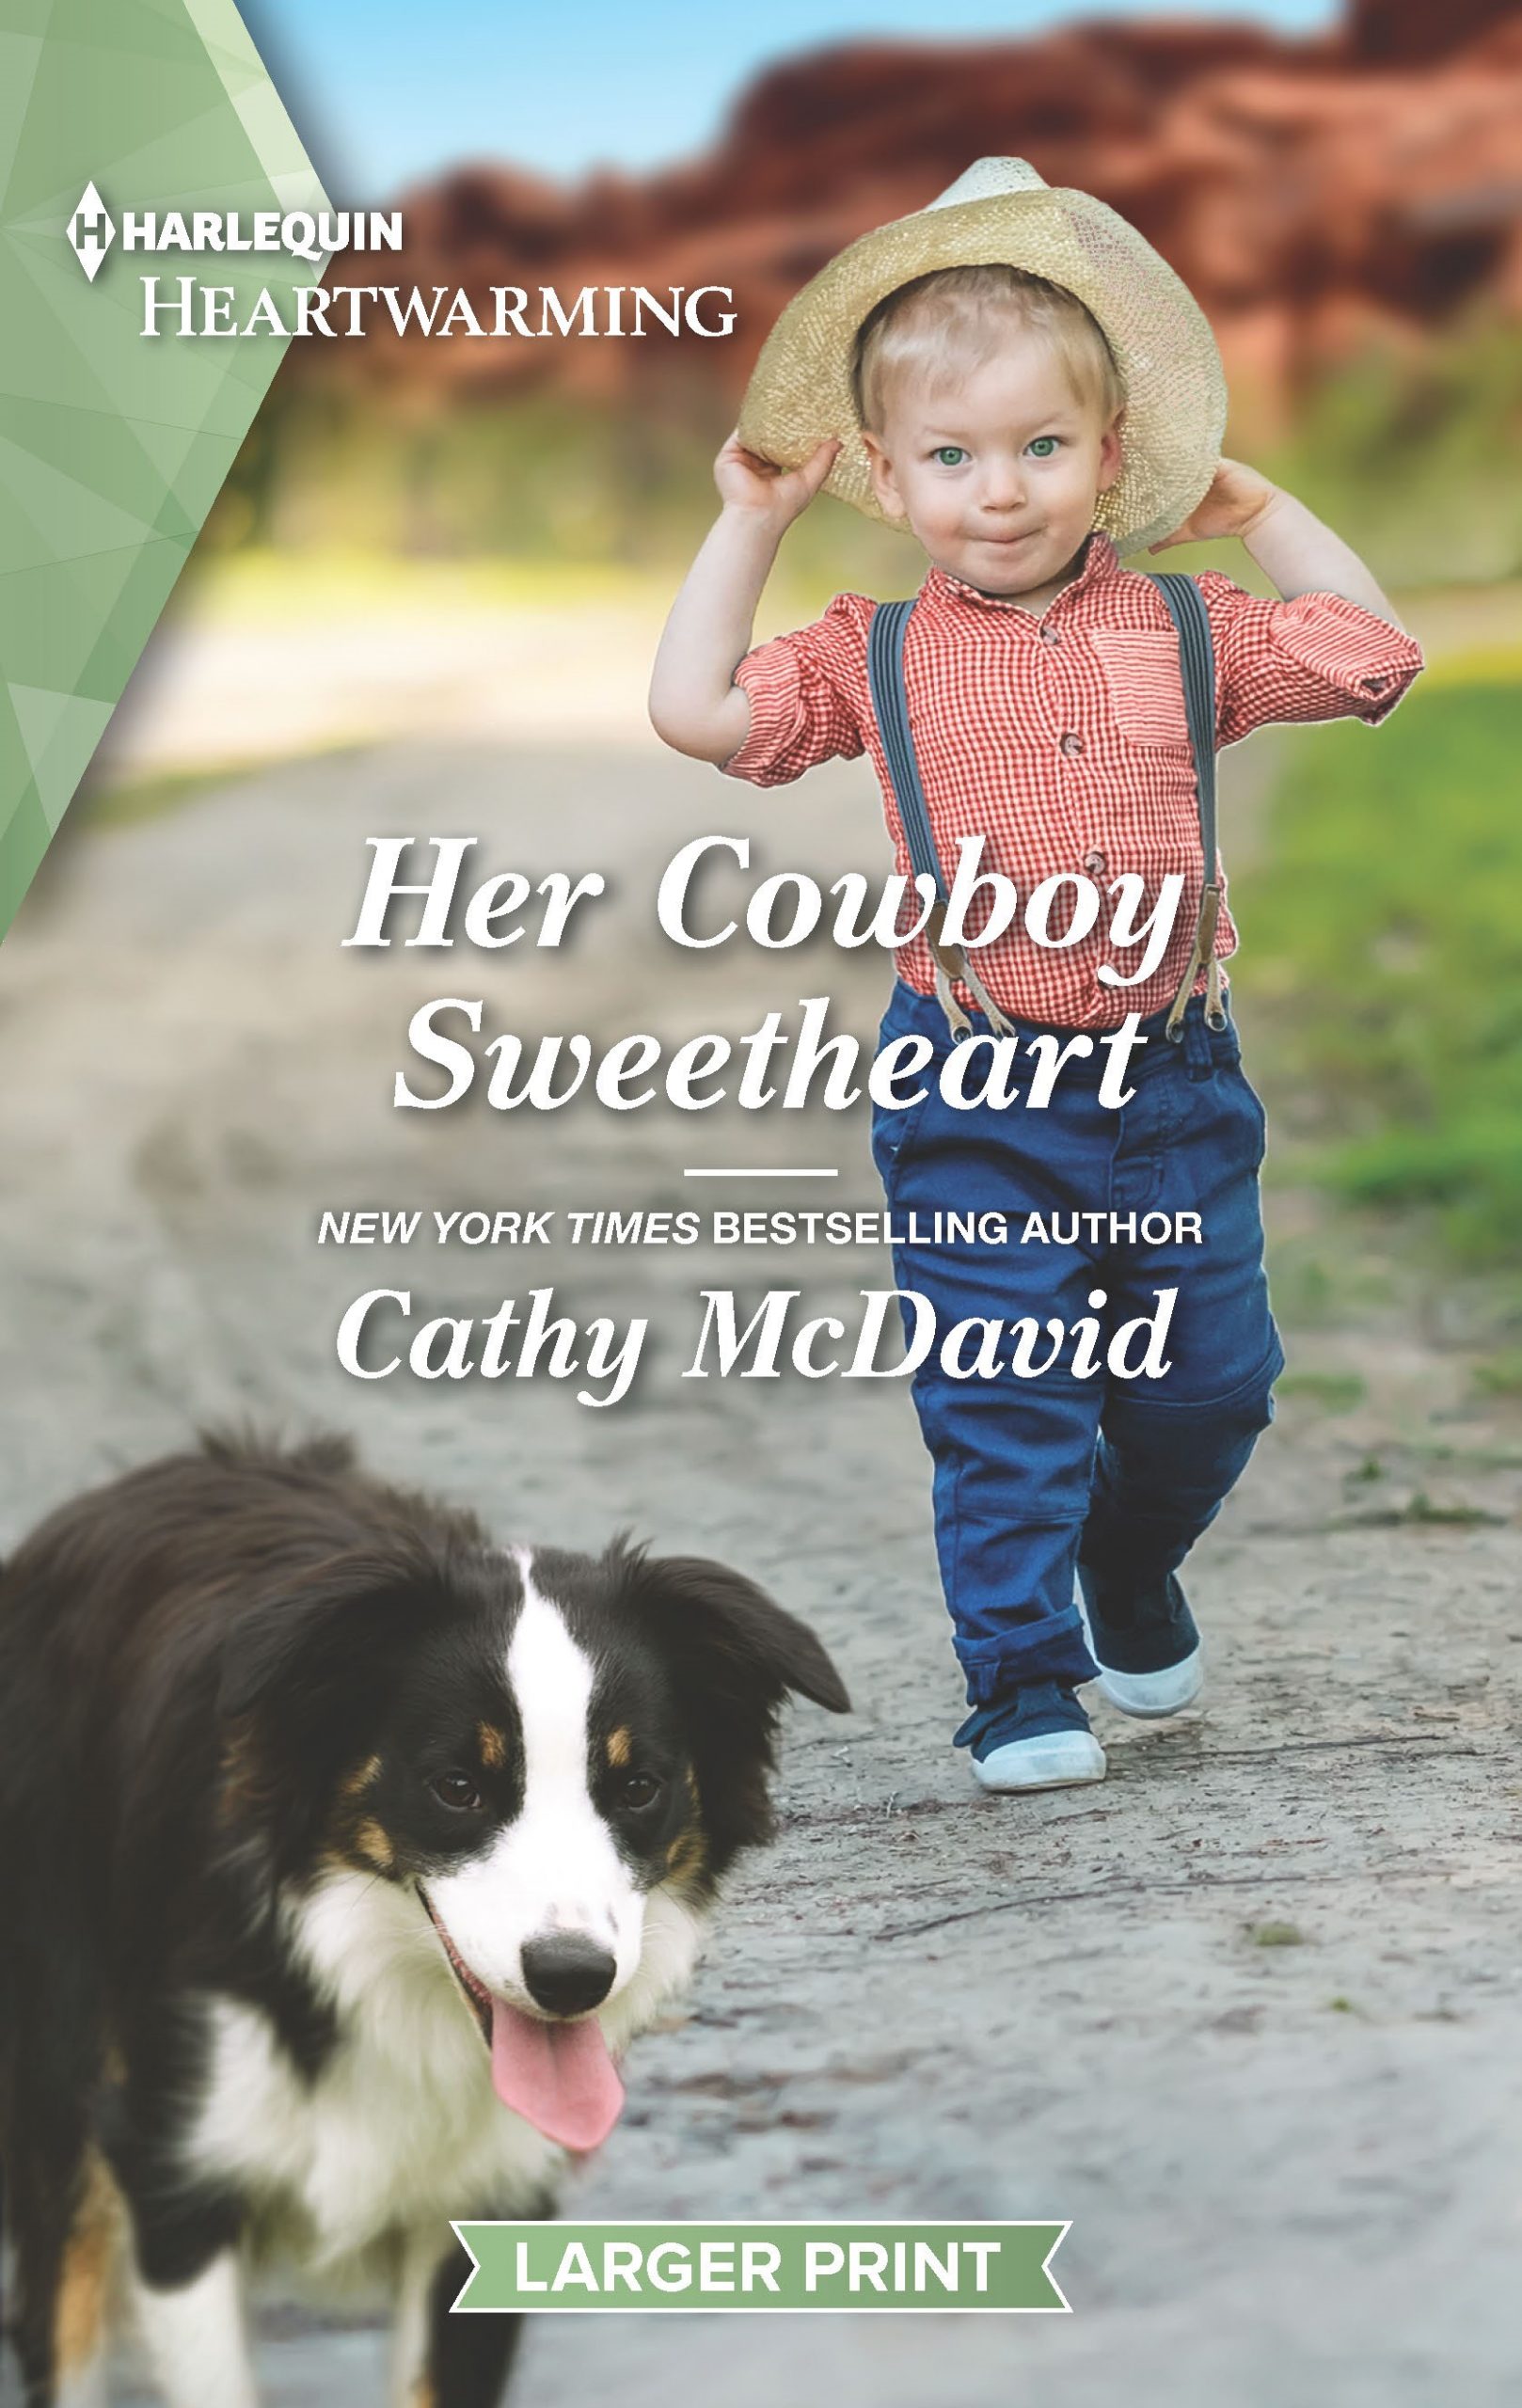 Her Cowboy Sweetheart by Cathy McDavid